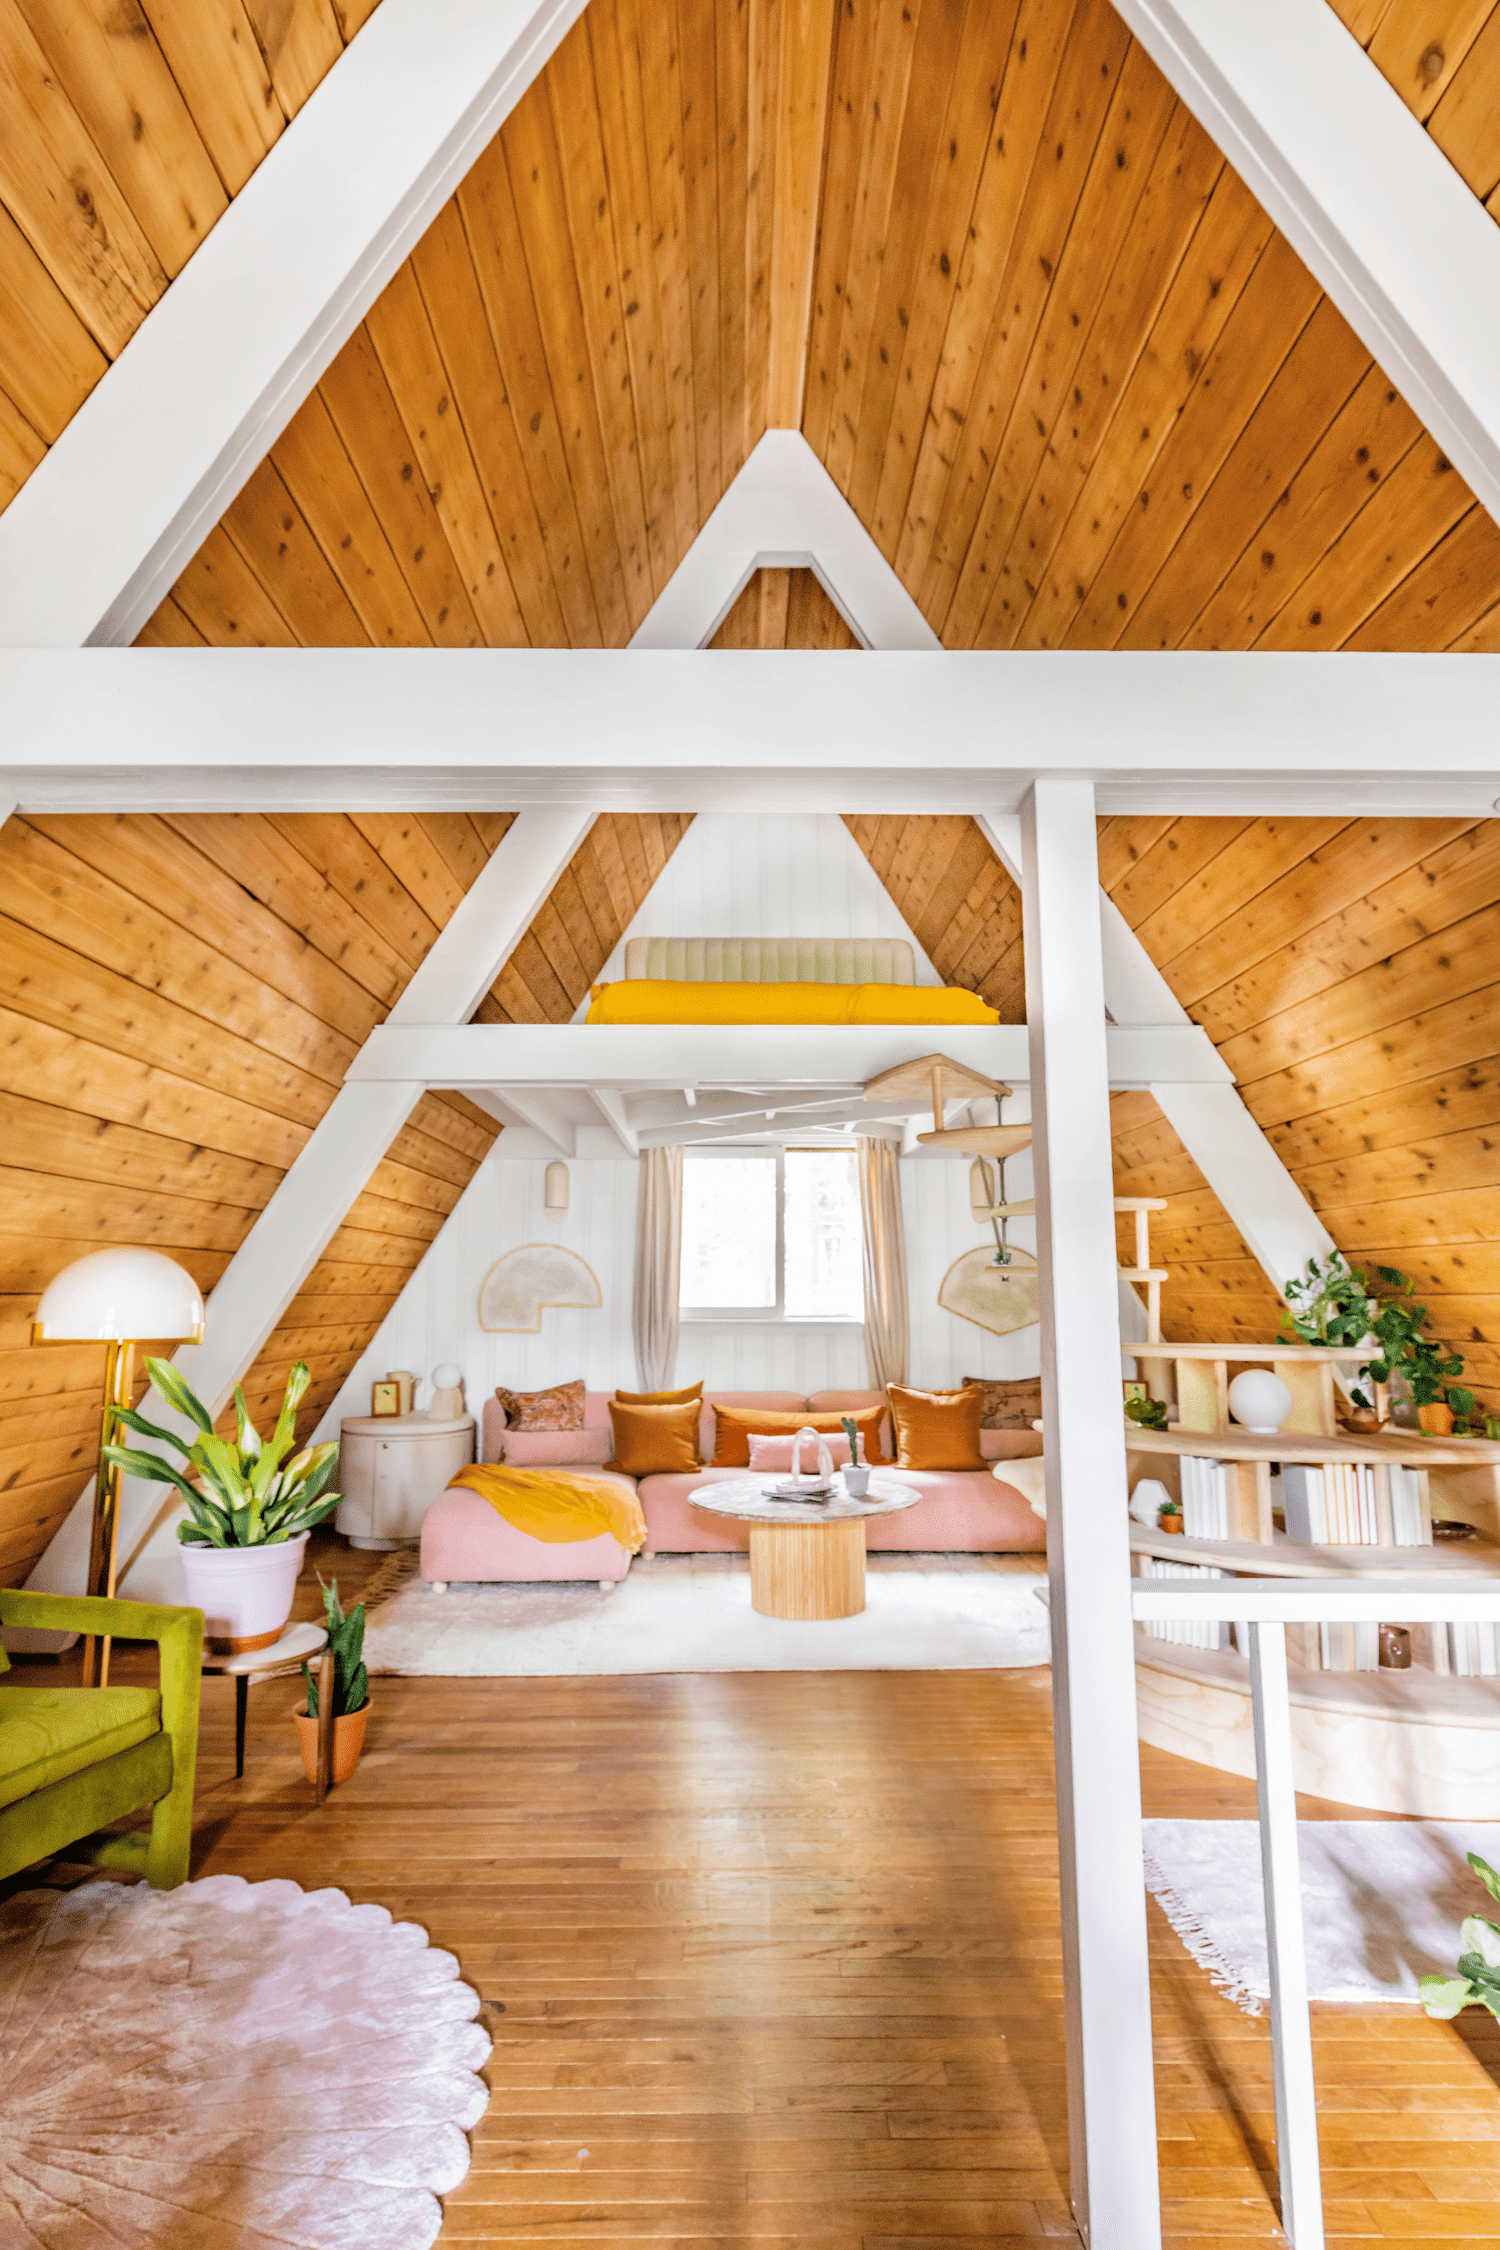 A-Frame Space of the Week